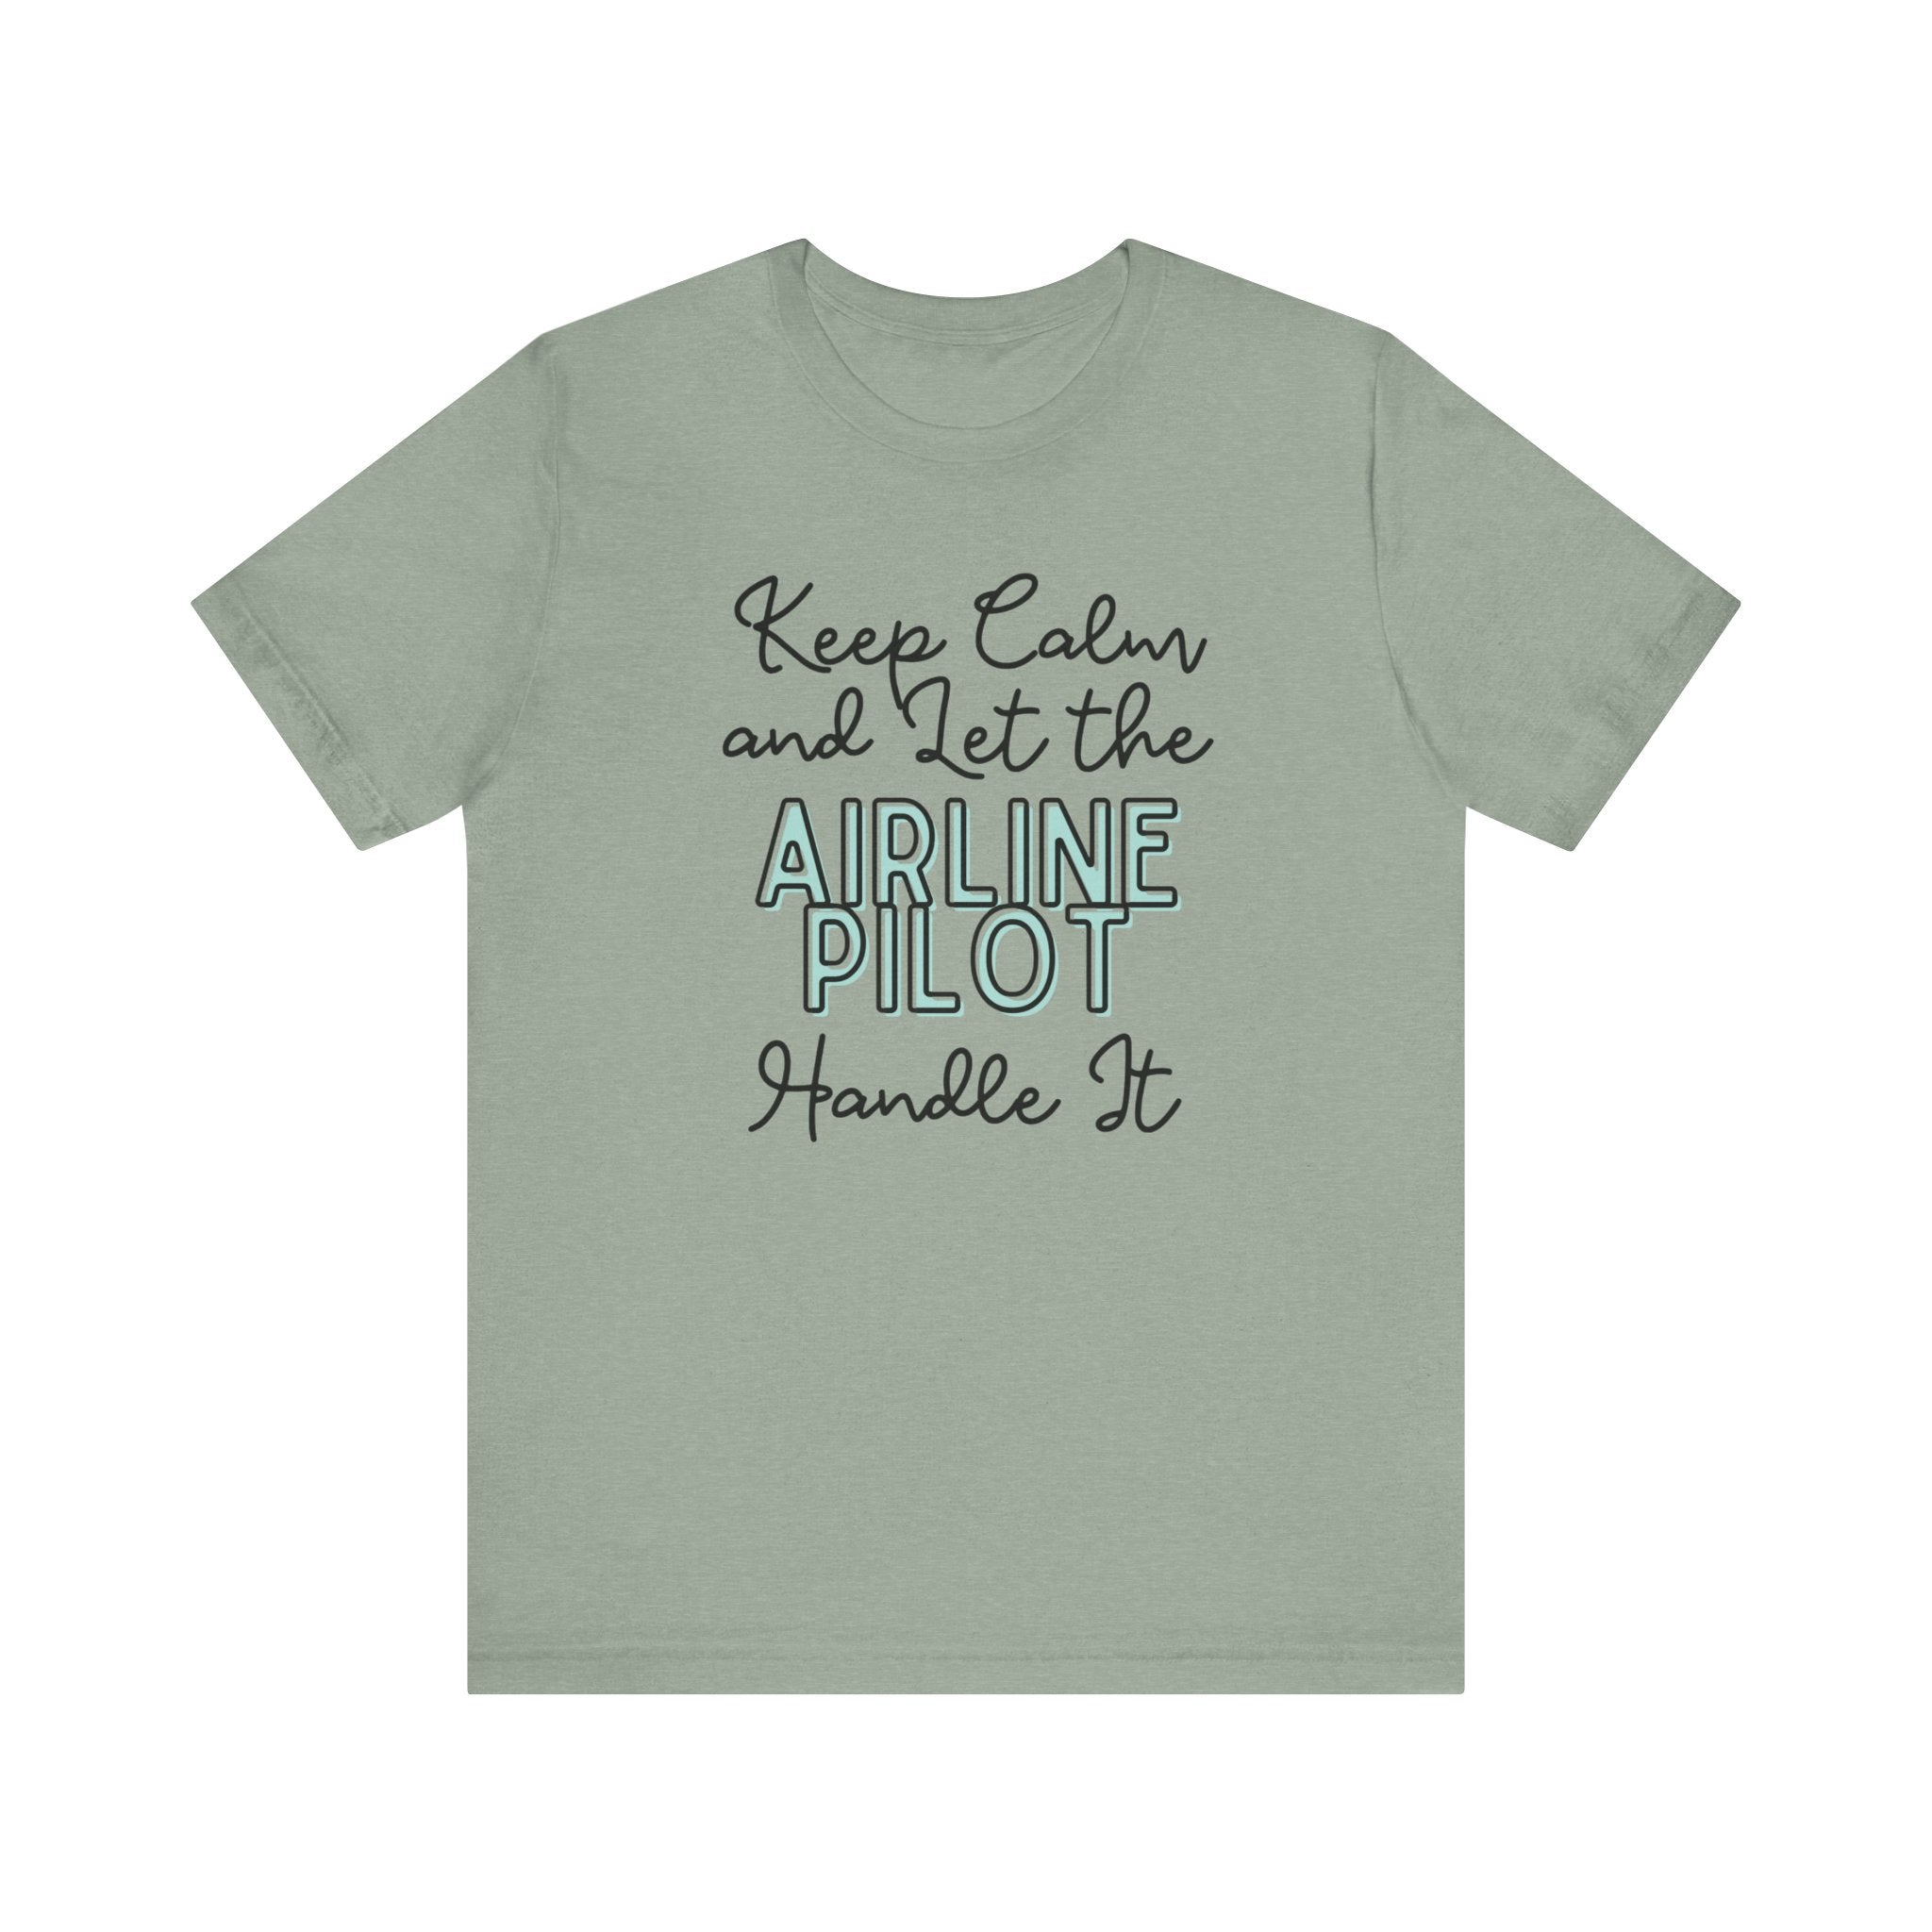 Keep Calm and let the Airline Pilot handle It - Jersey Short Sleeve Tee